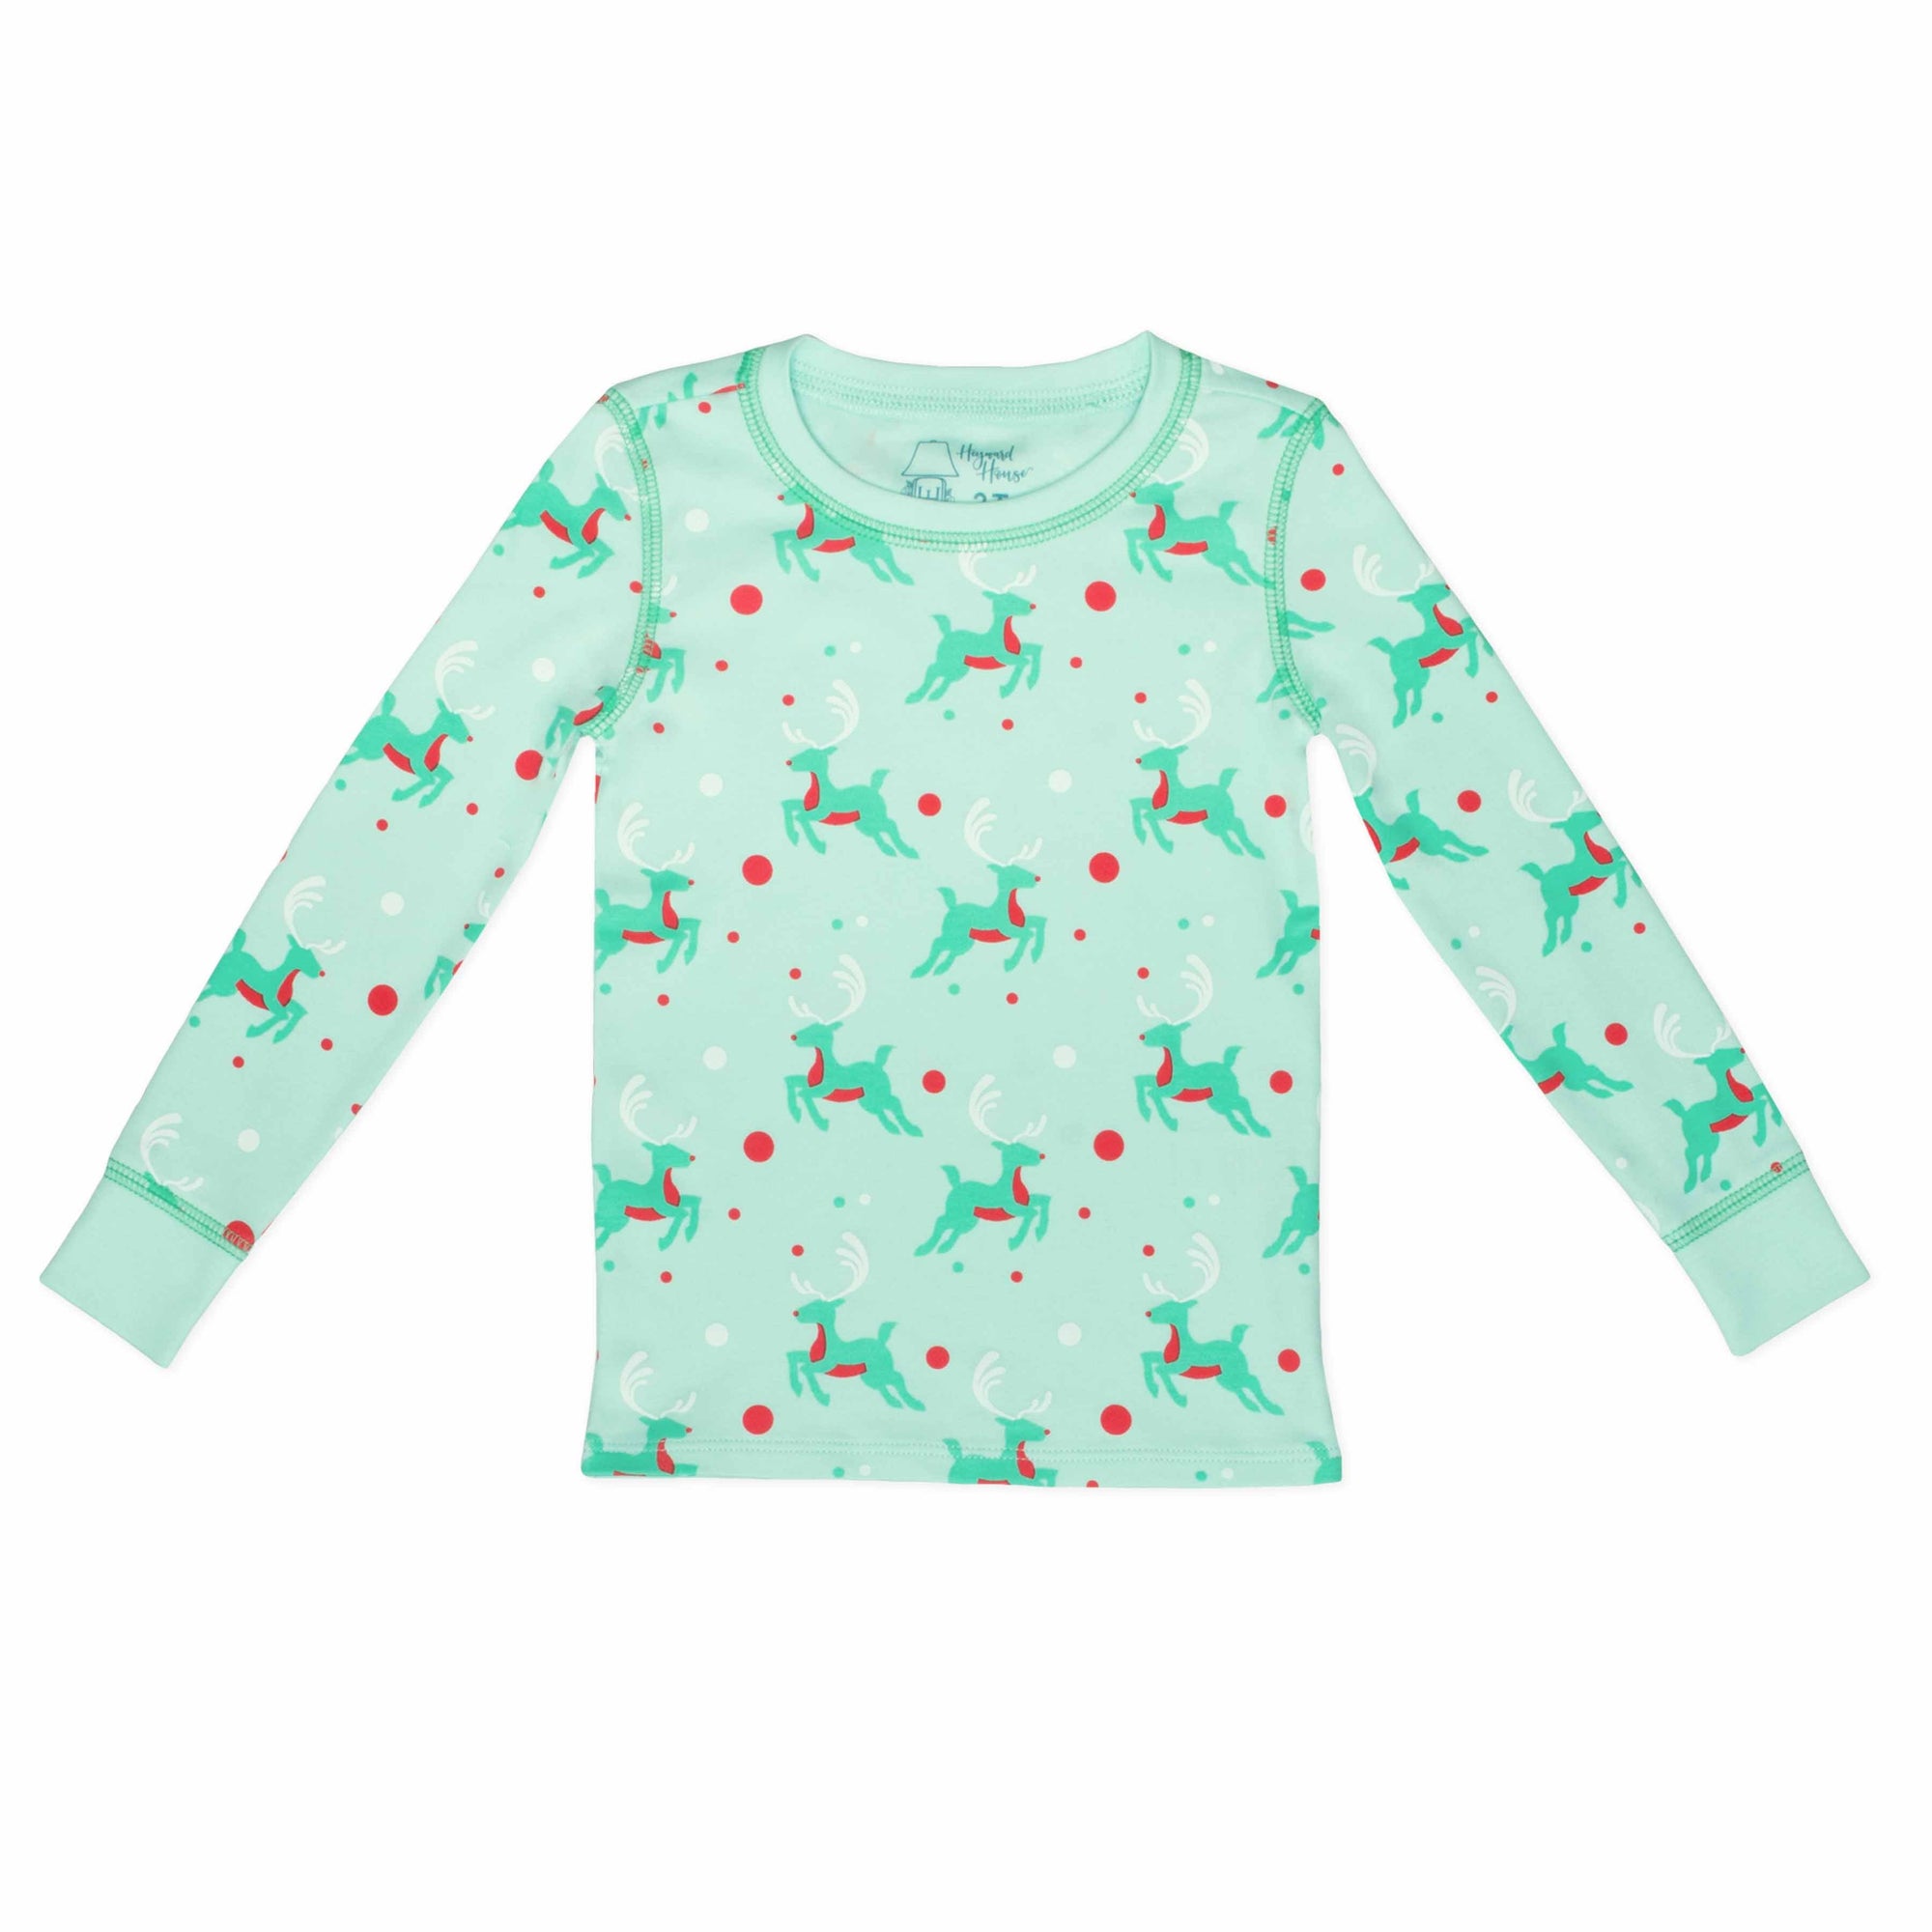 Mint green two-piece pajama top with vintage Christmas reindeer pattern made with pima cotton